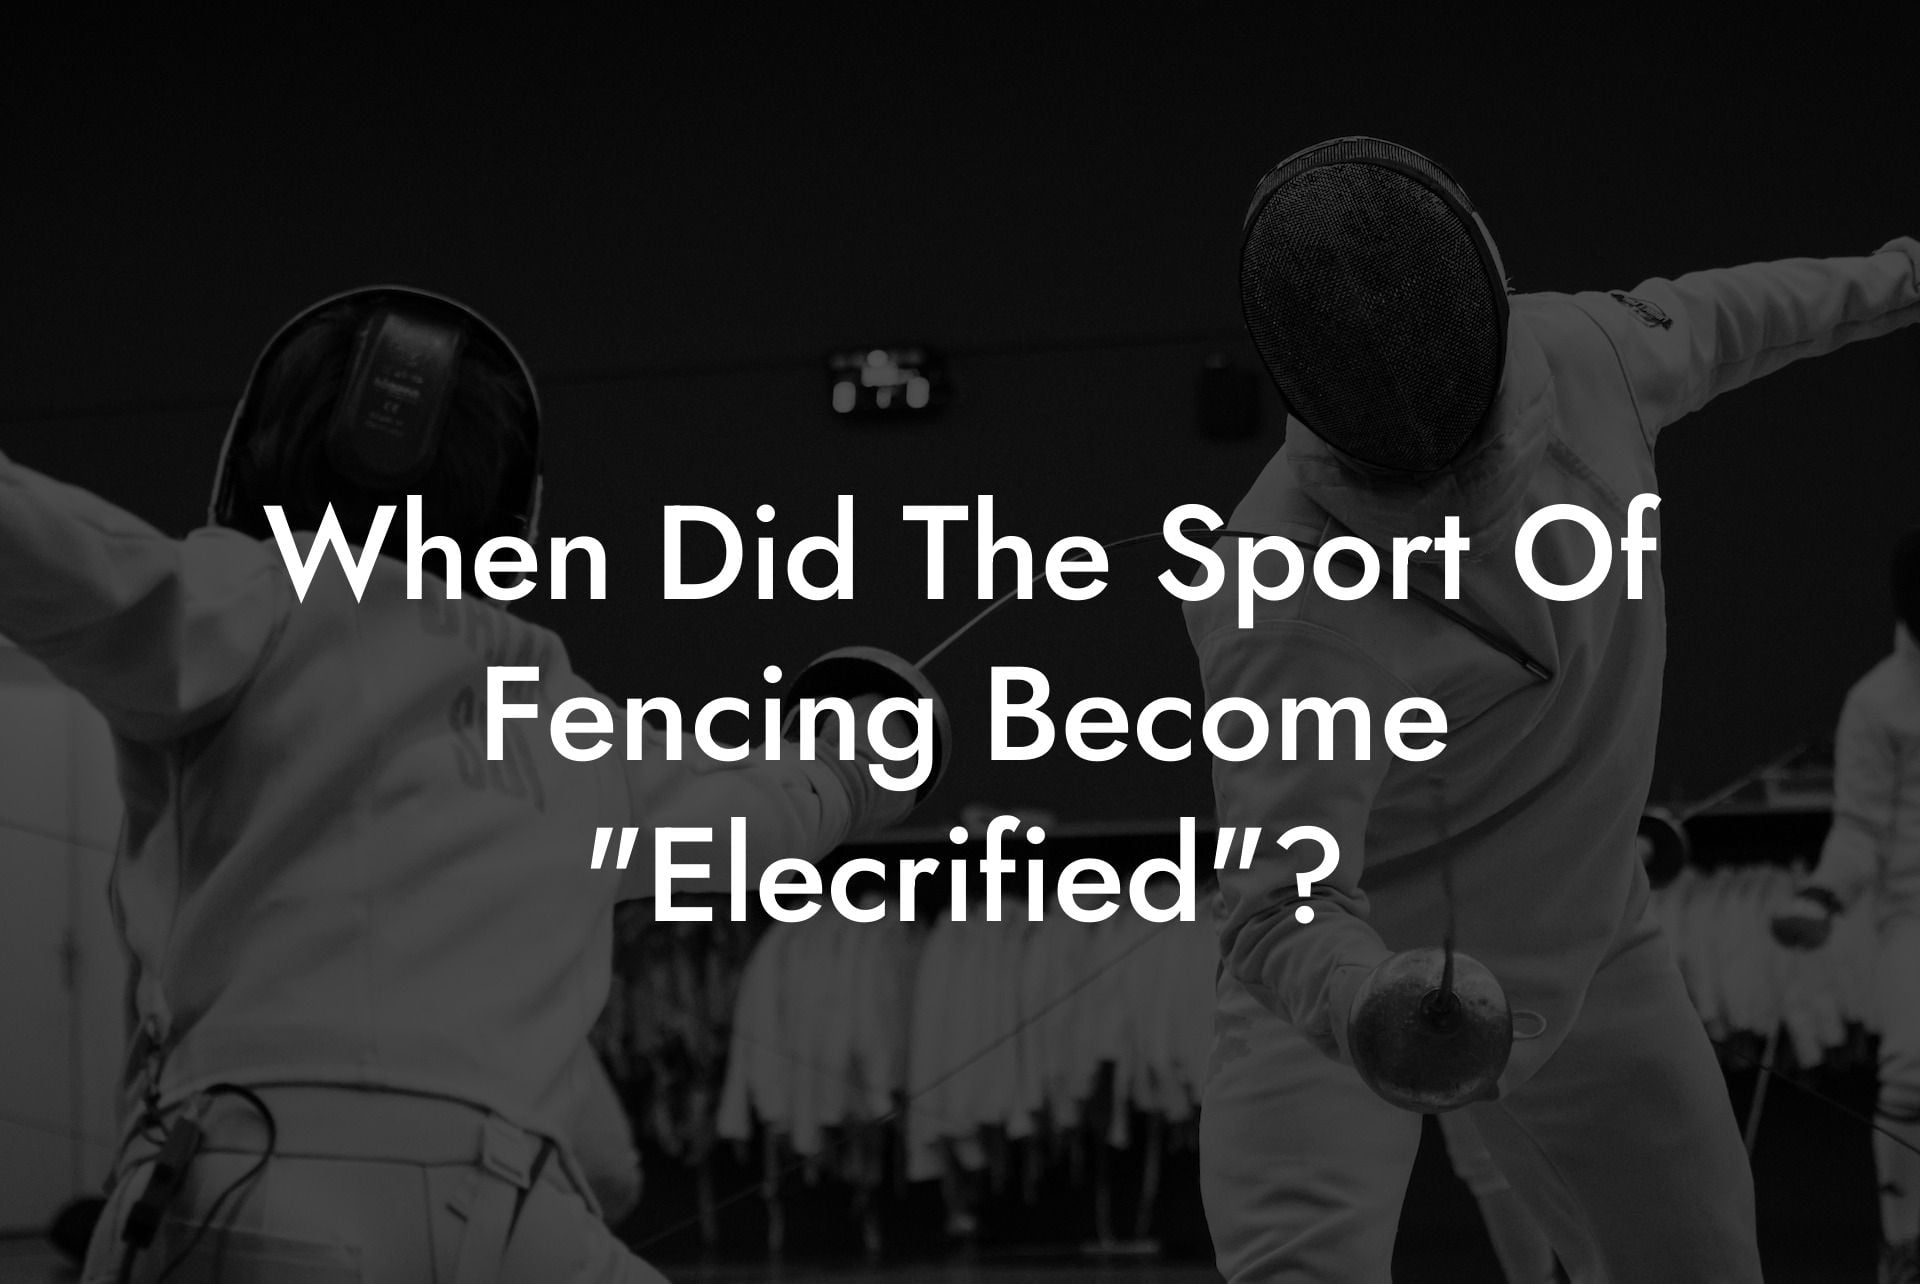 When Did The Sport Of Fencing Become "Elecrified"?